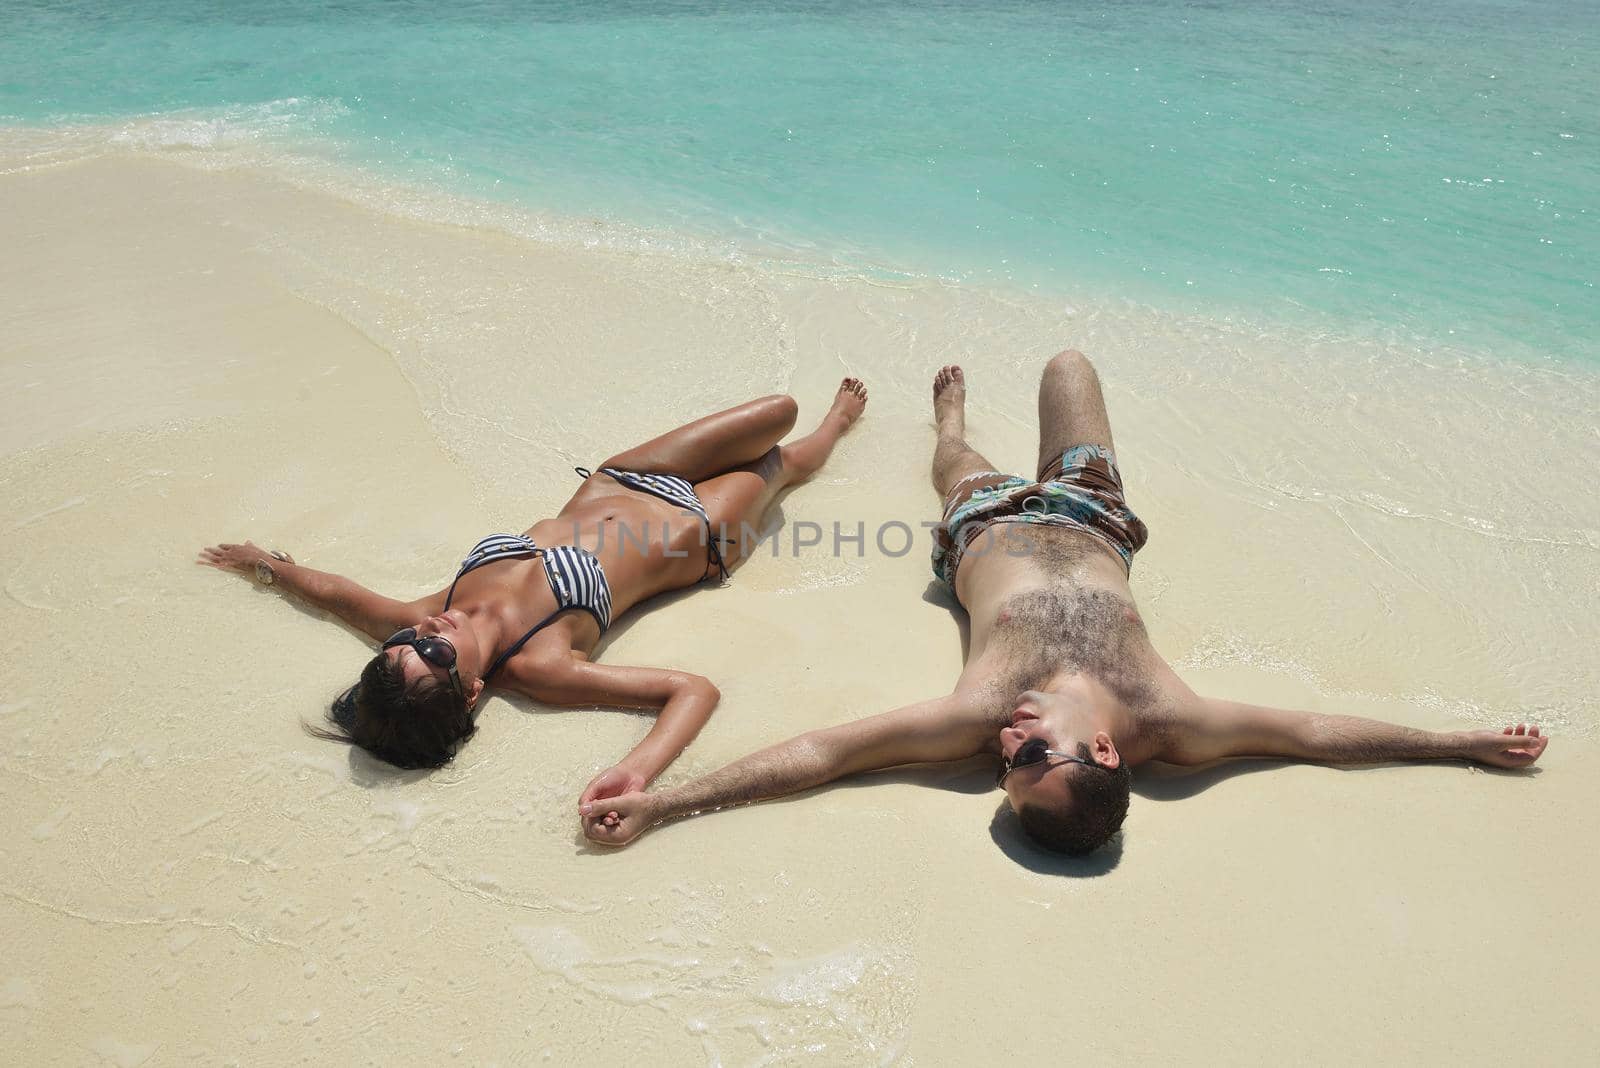 happy young romantic couple in love have fun and relaxing on beautiful beach